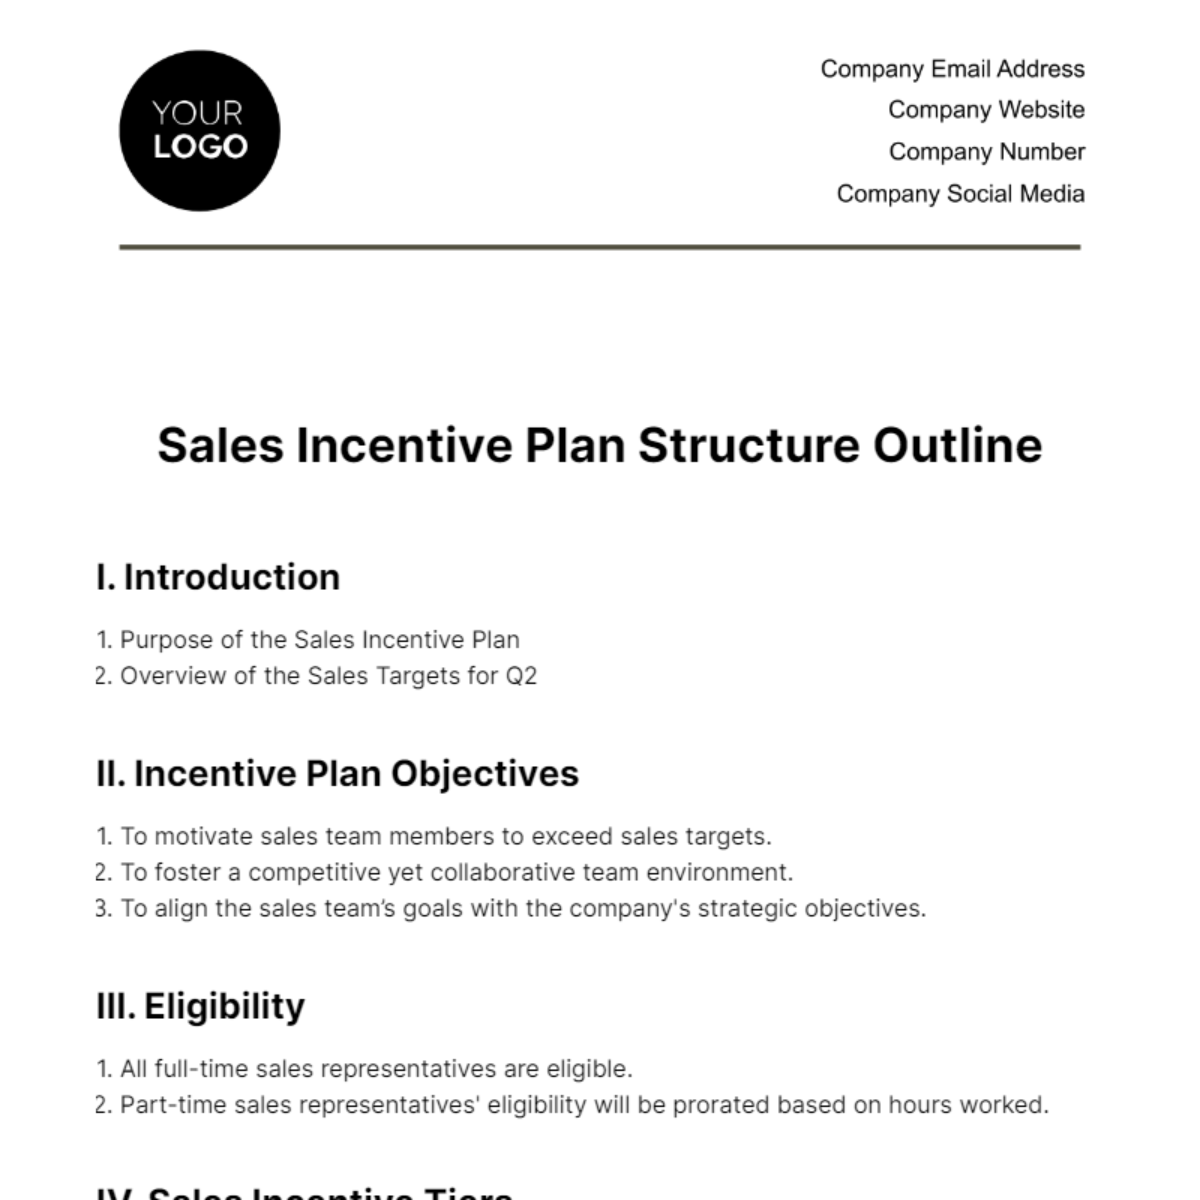 Free Sales Incentive Plan Structure Outline Template